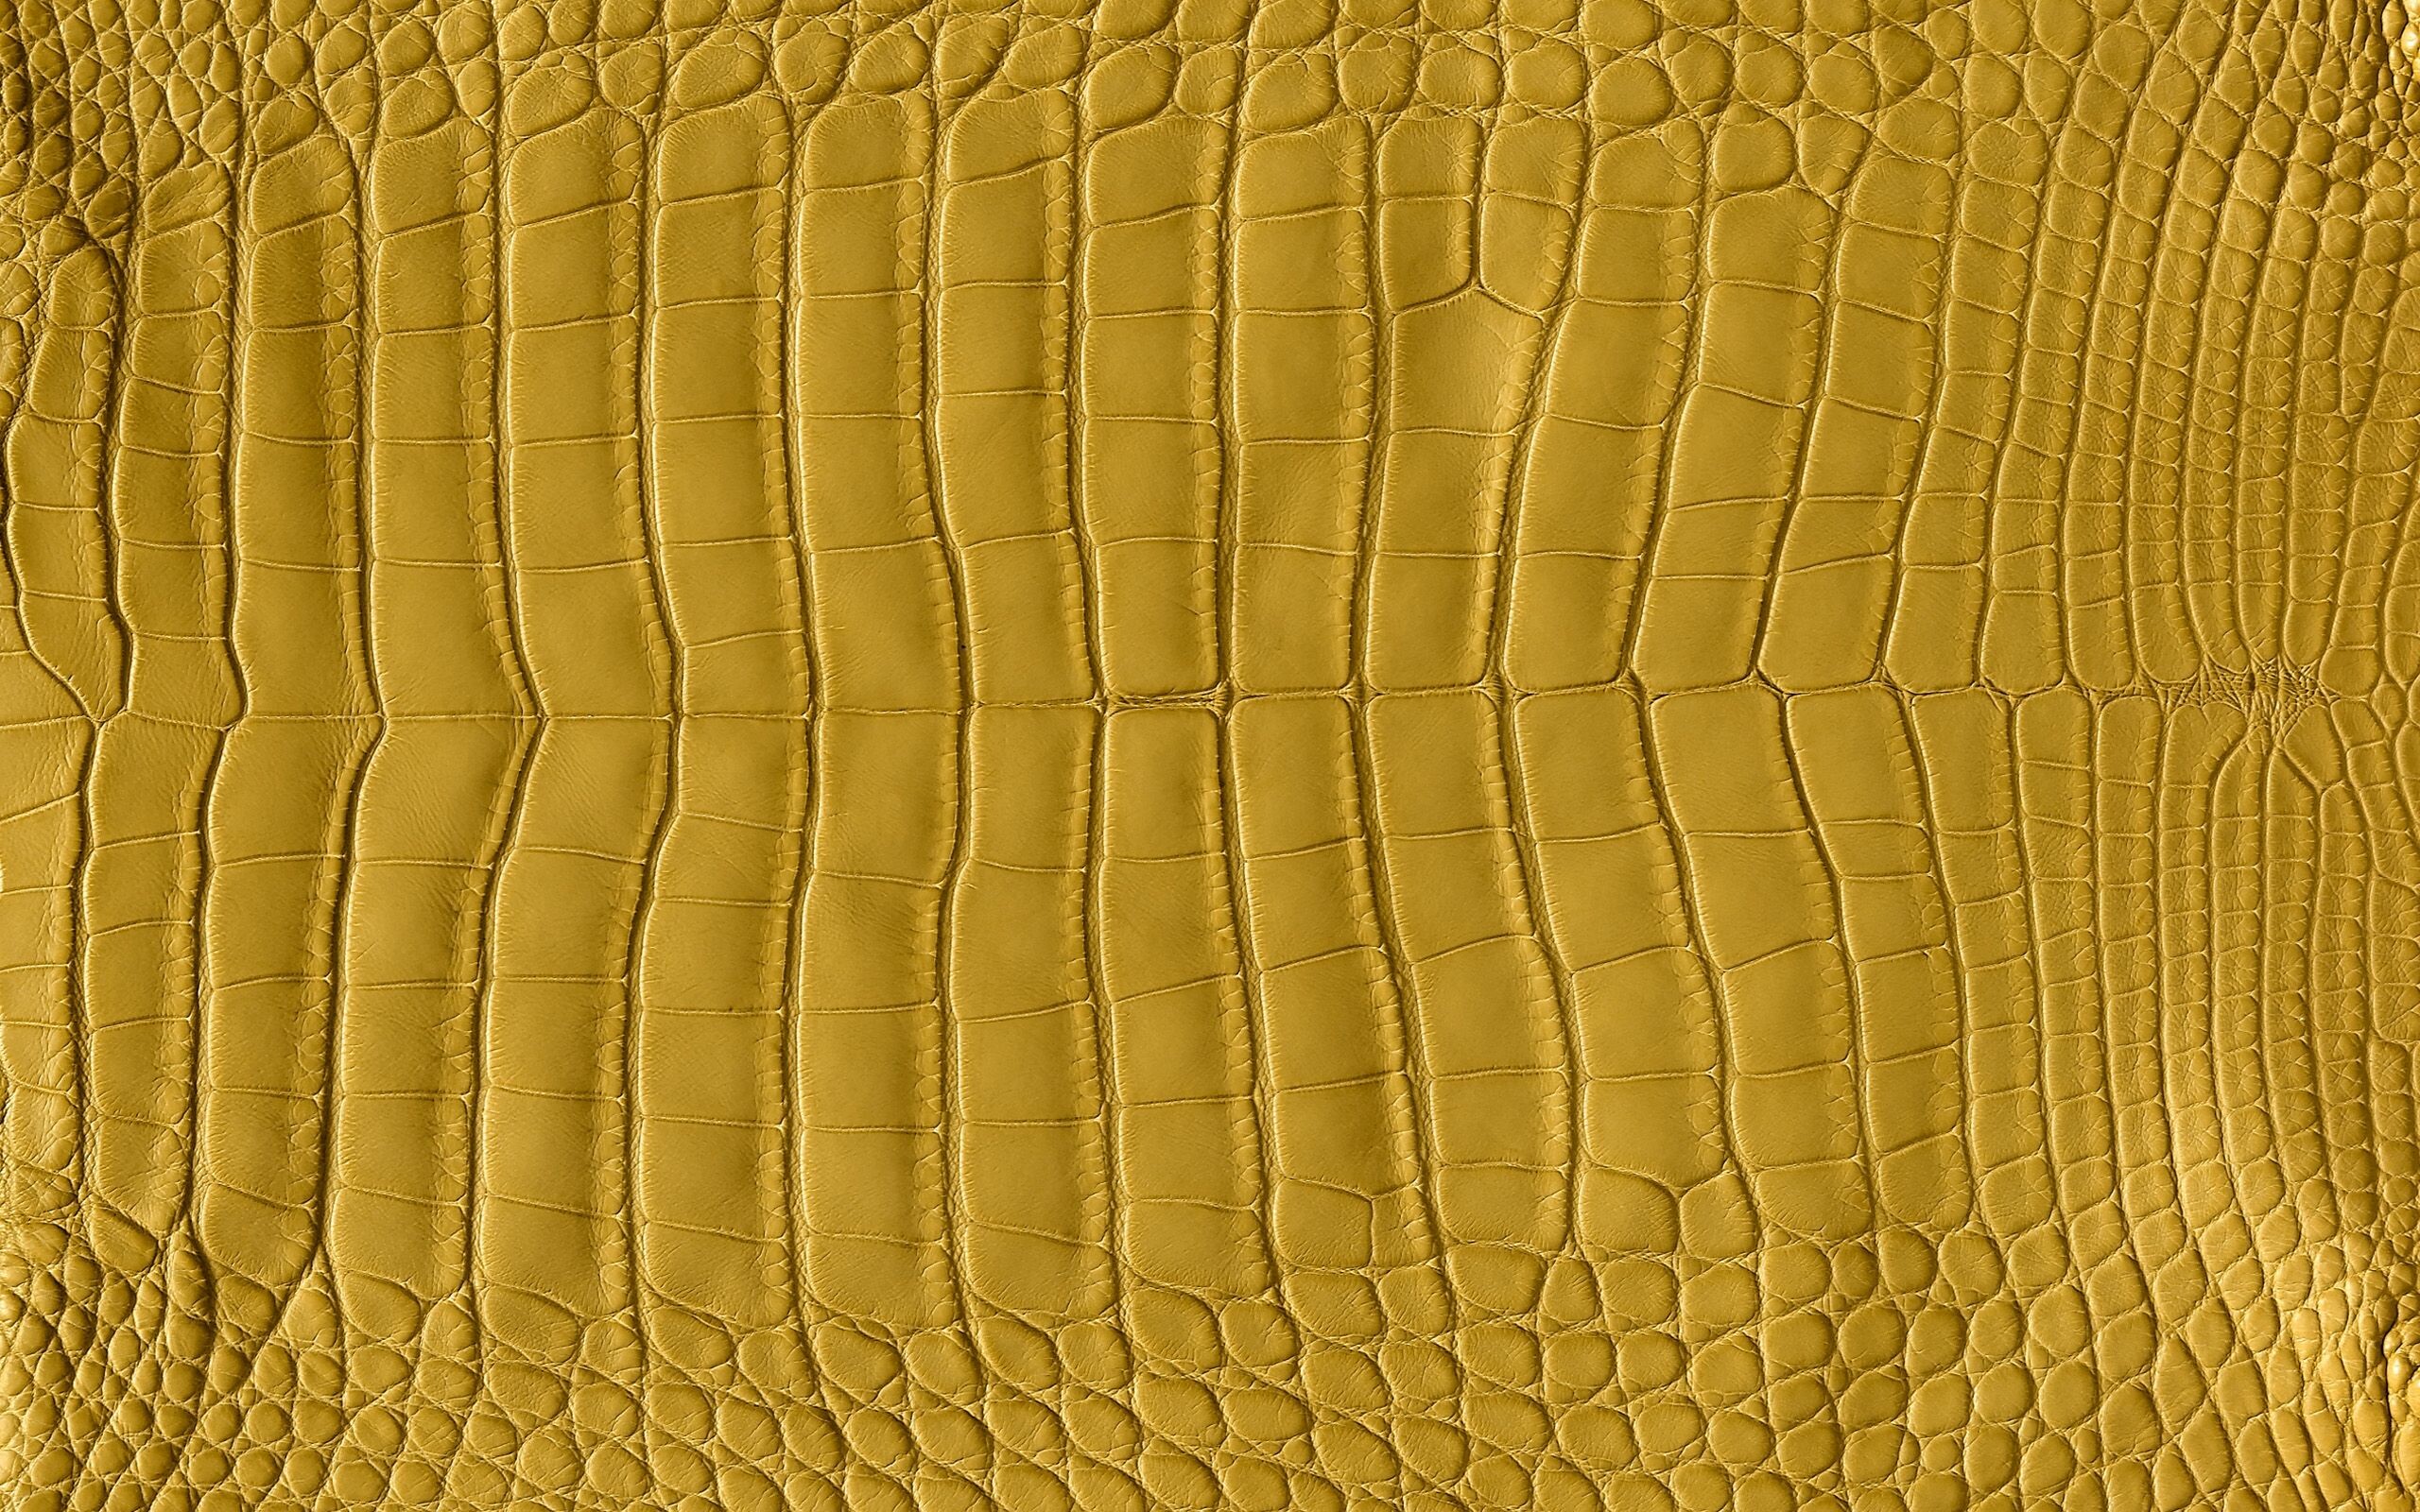 Hermes: A sample of alligator leather, Crocodile skin, A fashion house steeped in history and tradition. 2560x1600 HD Wallpaper.